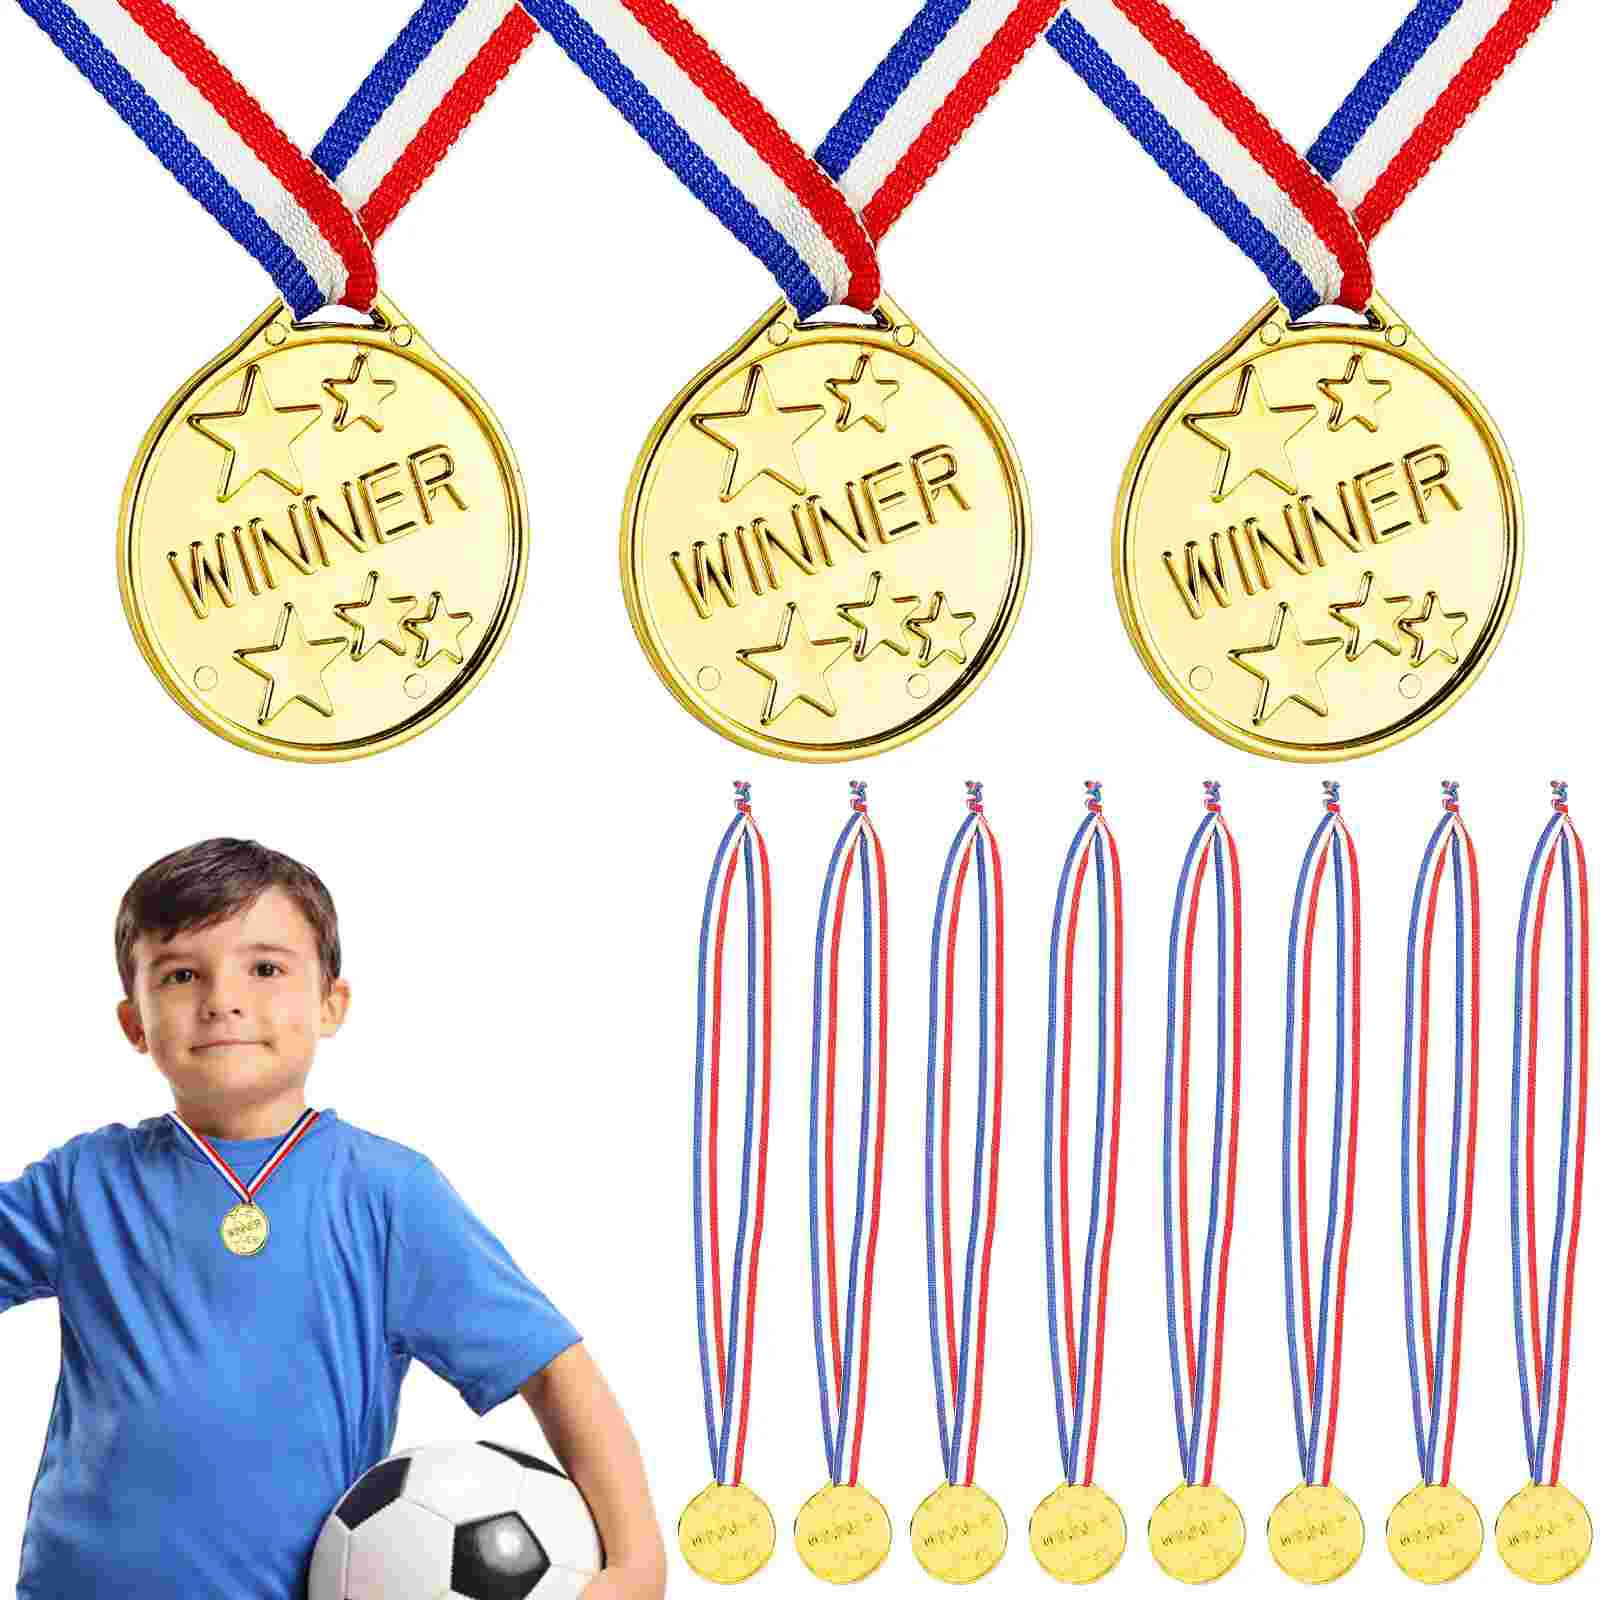 

Kids Kids Prize Games Competition Kids Medals Sports Day Medals Sports Day Games Childrens Medals Kids' Party Supplies Dance